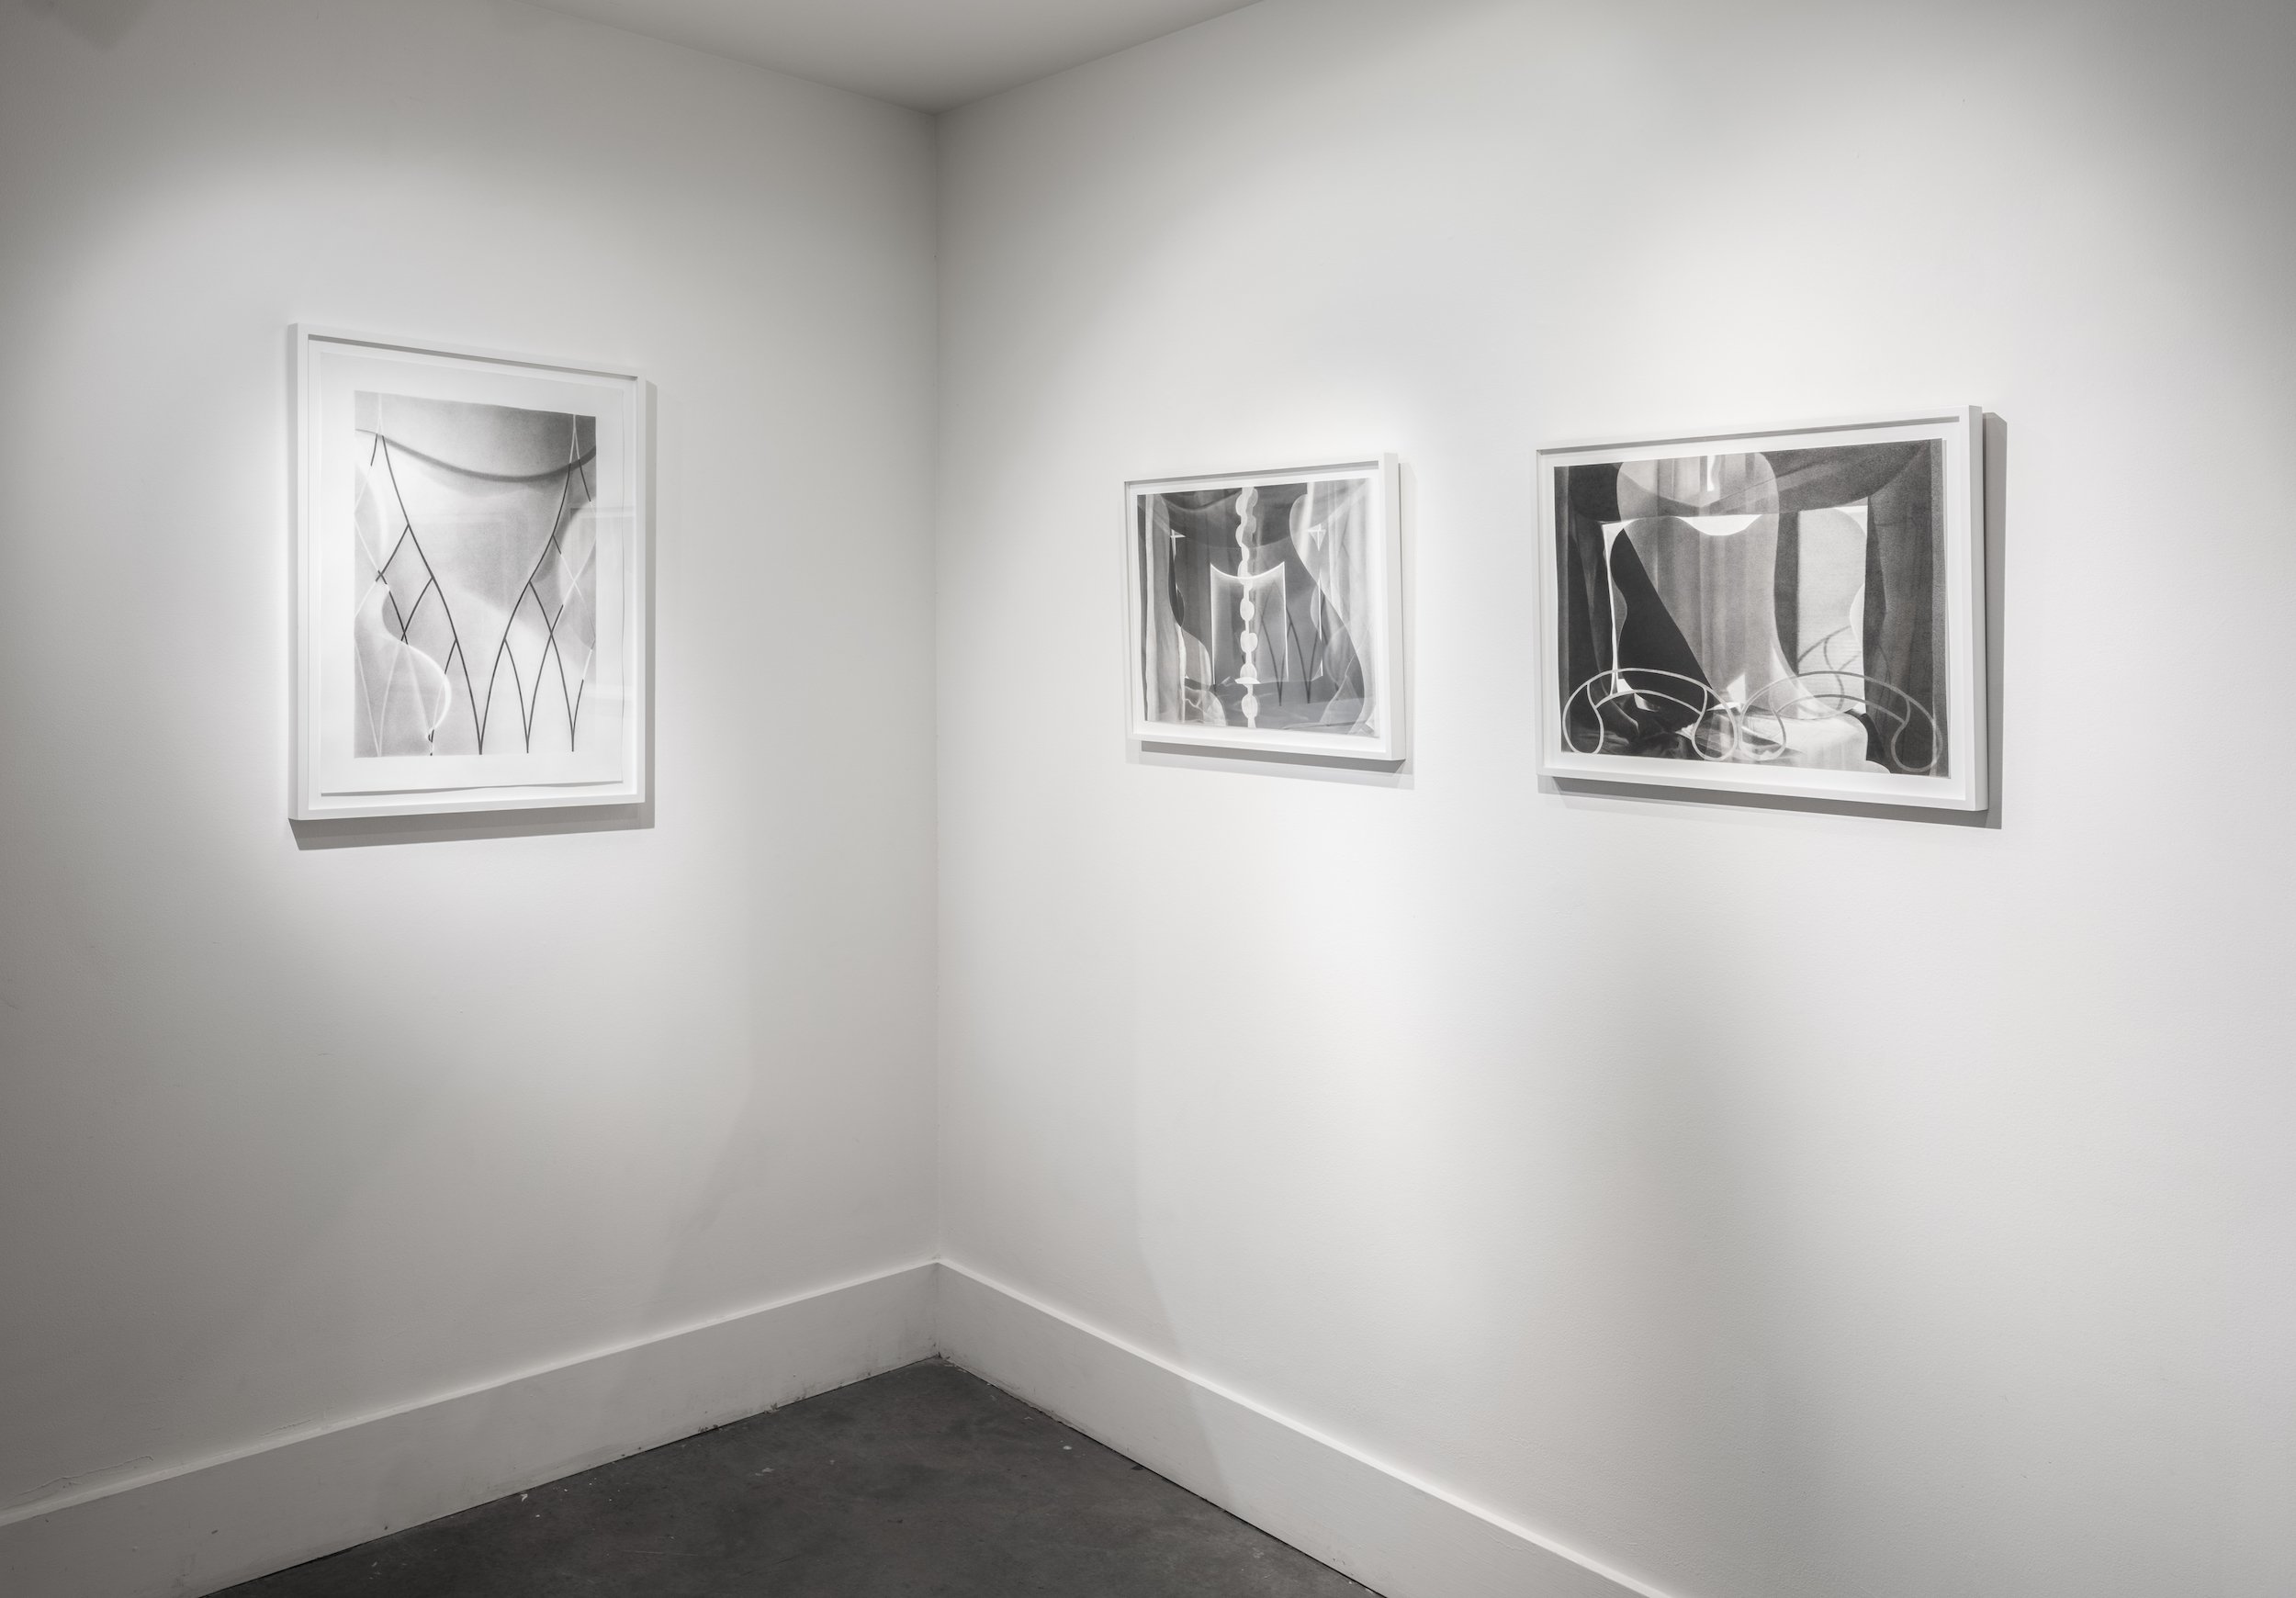  Installation view,  What We See and What We Know,  HOLDING Contemporary 